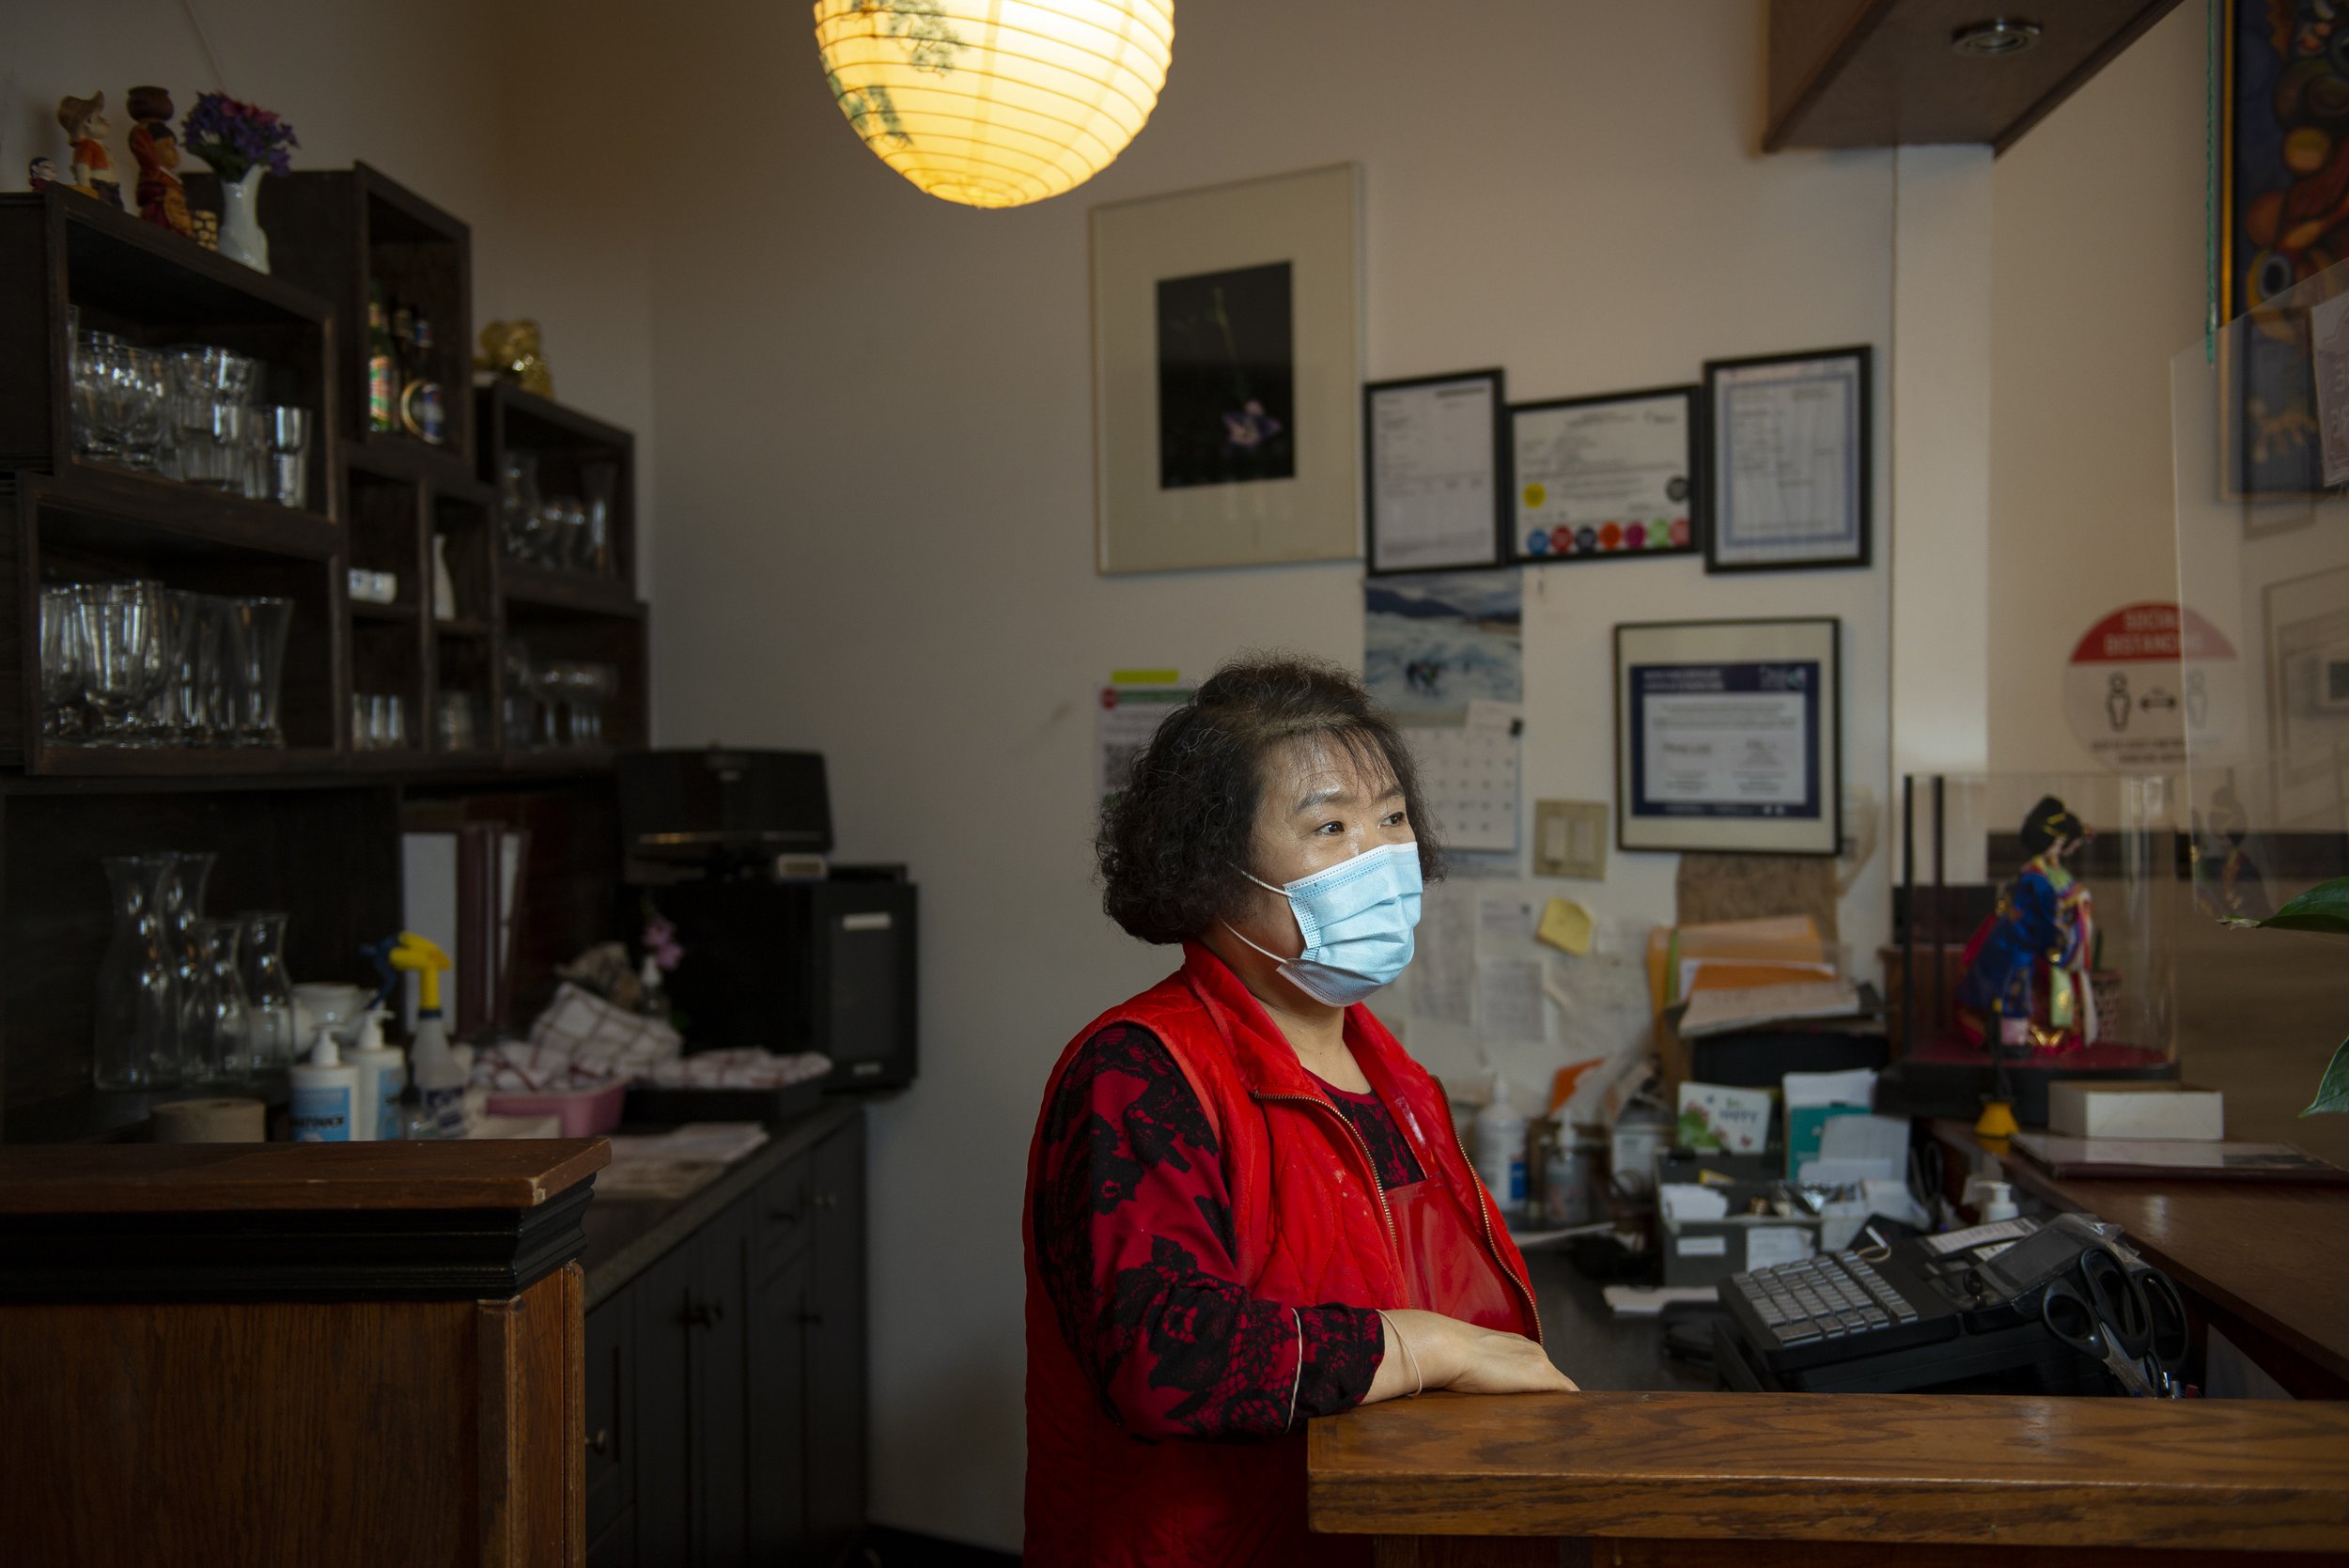  Kyung Rae La also knows the challenges and long hours of restaurant life.  After arriving in Canada in 1997 she worked in various Korean kitchens before opening her own restaurant, Mu Goong Hwa on Rideau Street in 2012 (she also raised two daughters